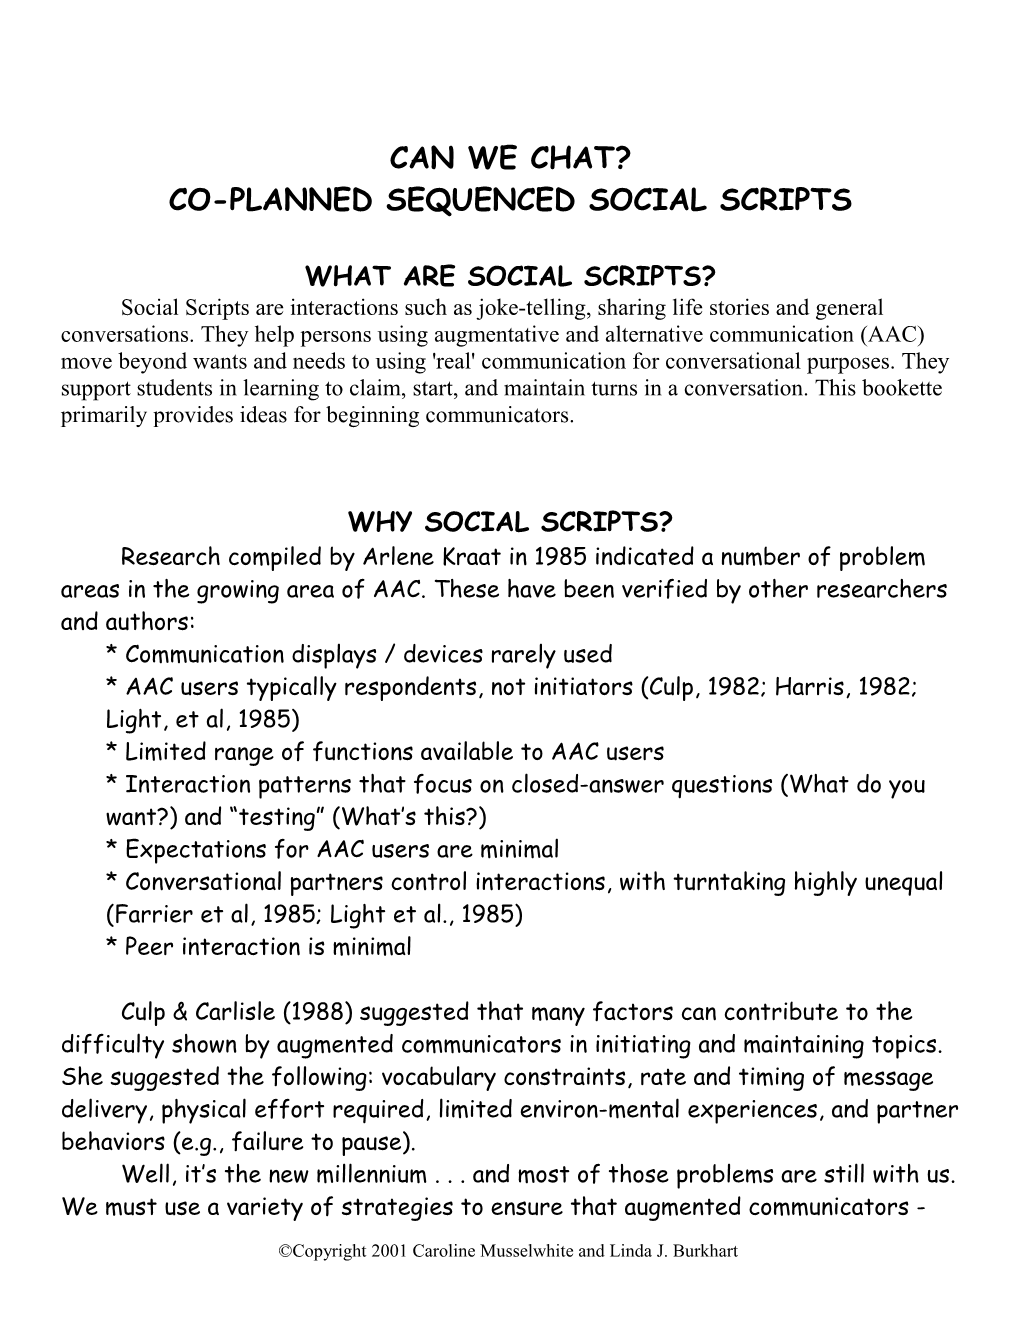 What Are Social Scripts